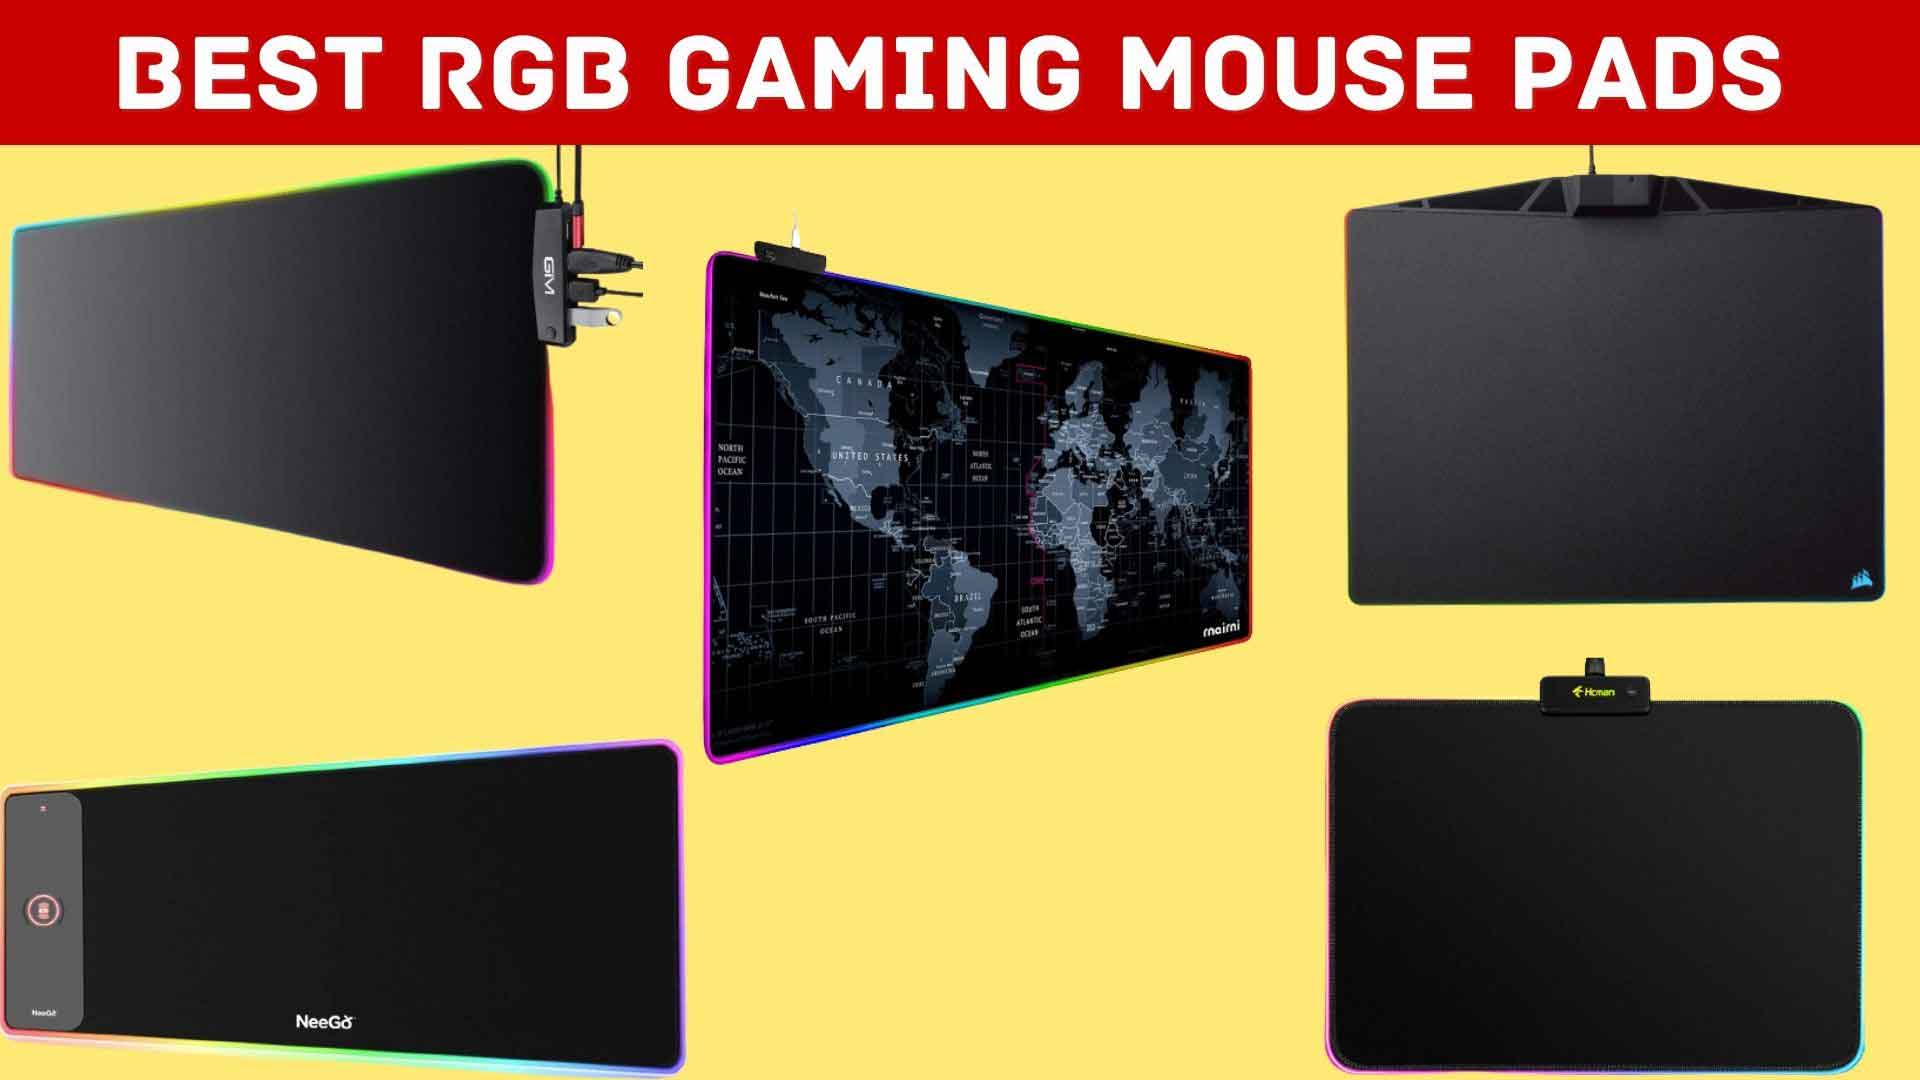 Best RGB Gaming Mouse Pads